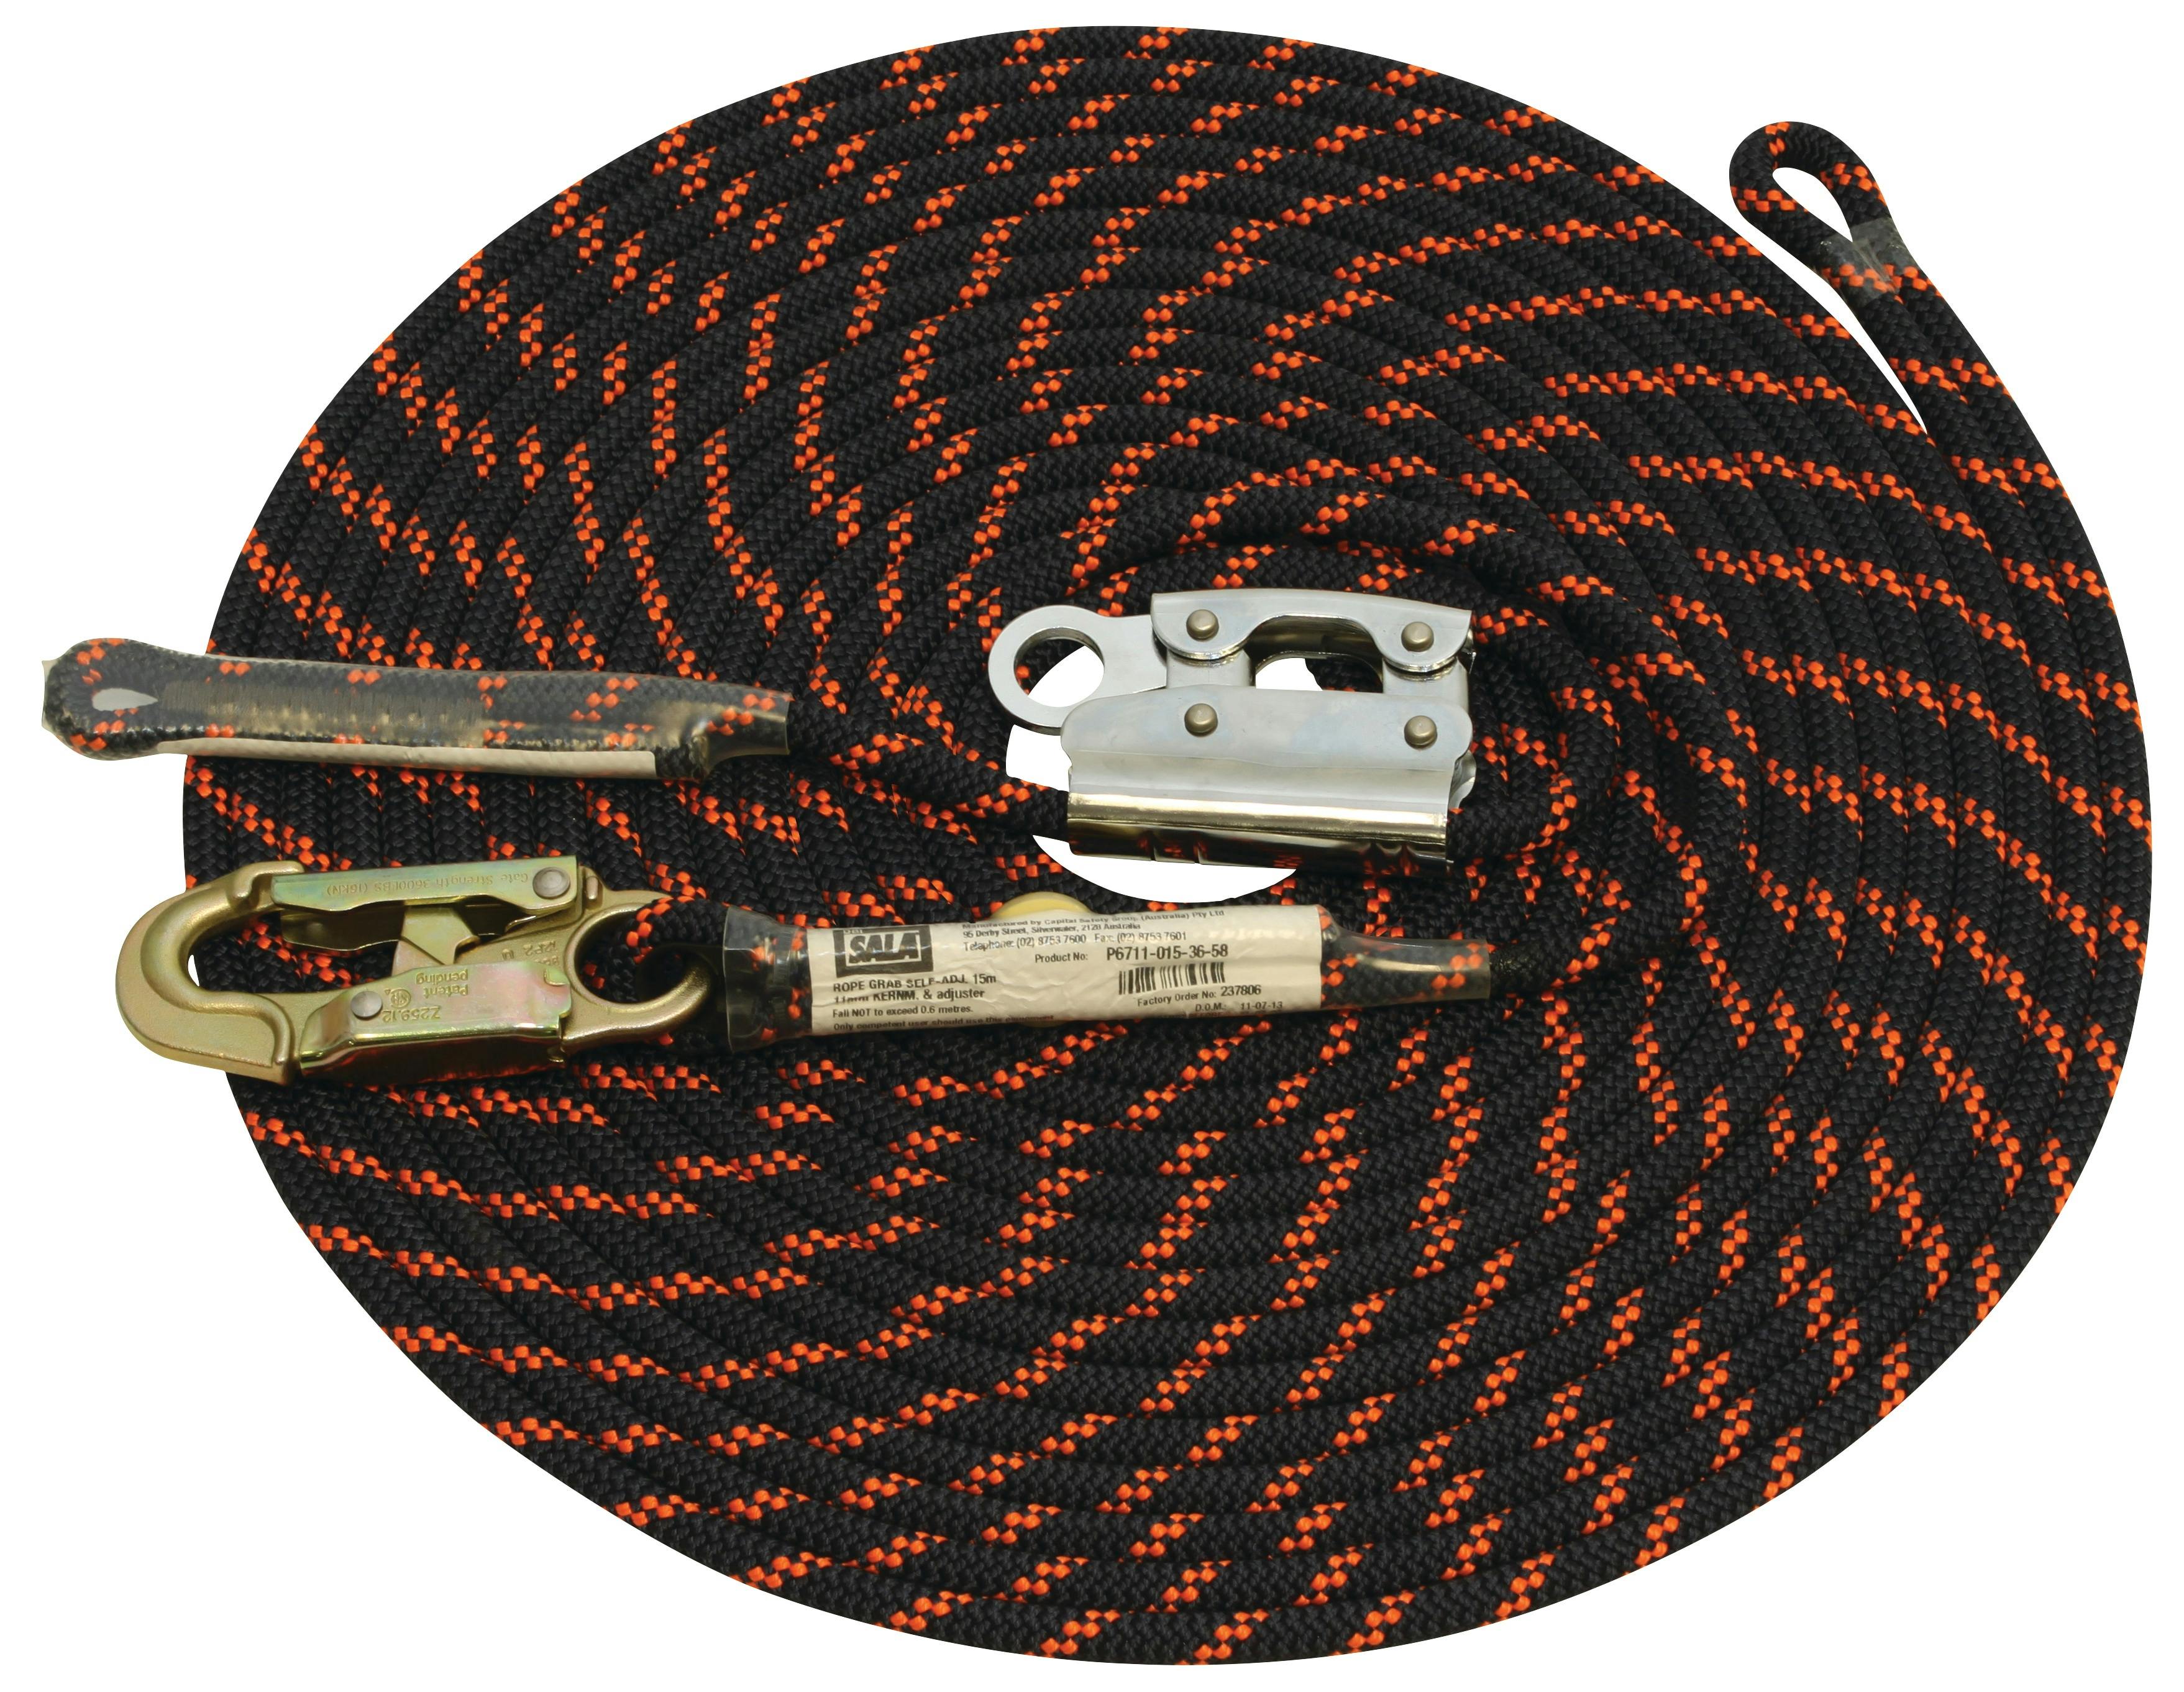 3M™ DBI-SALA® Lifeline Assembly System with integral Rope Grab P6711-020-36-58, 20 m, 1 EA/Case